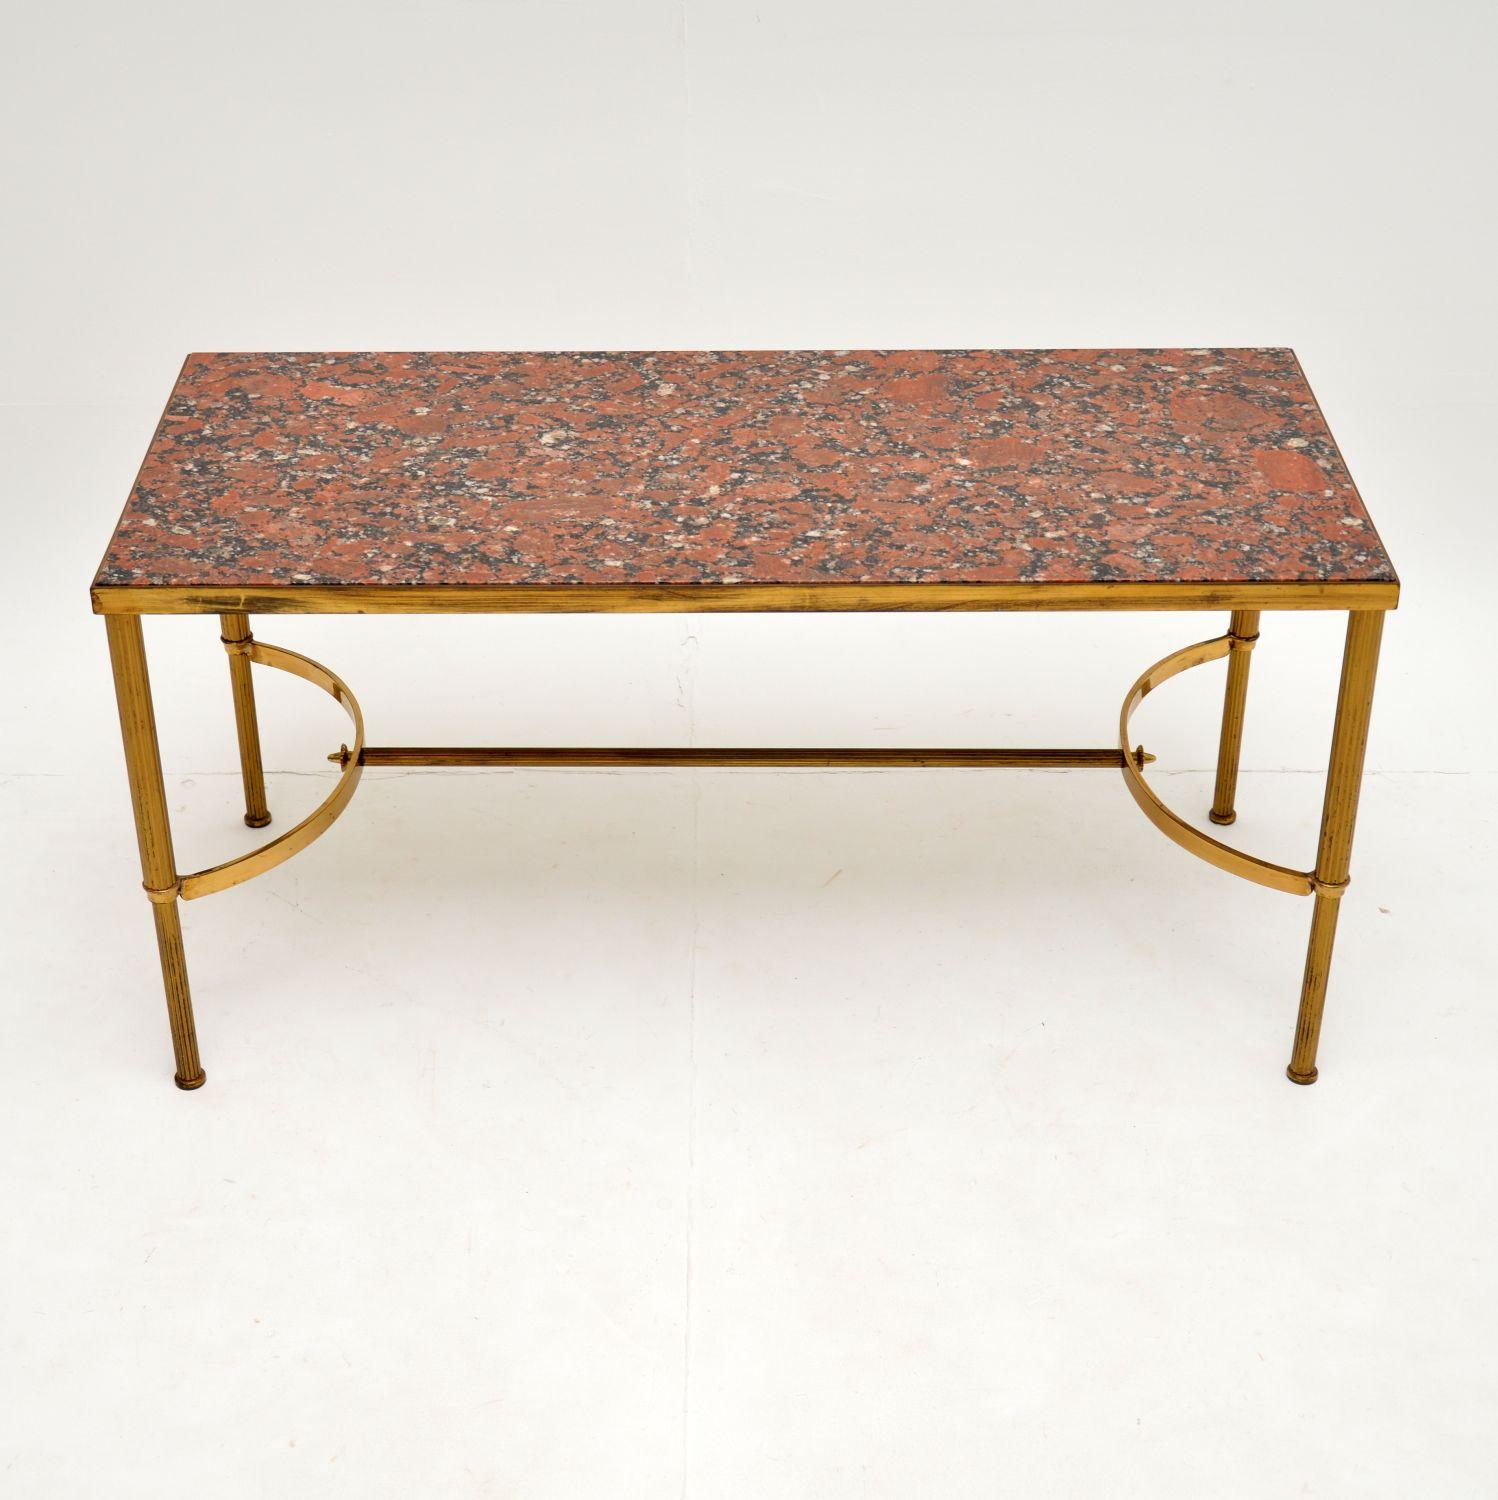 A stylish and beautifully made vintage coffee table in solid brass, with an inset marble top. This was made in Italy and dates from circa 1960s.

It is of superb quality, the solid brass frame is beautifully shaped with a wishbone shaped stretcher